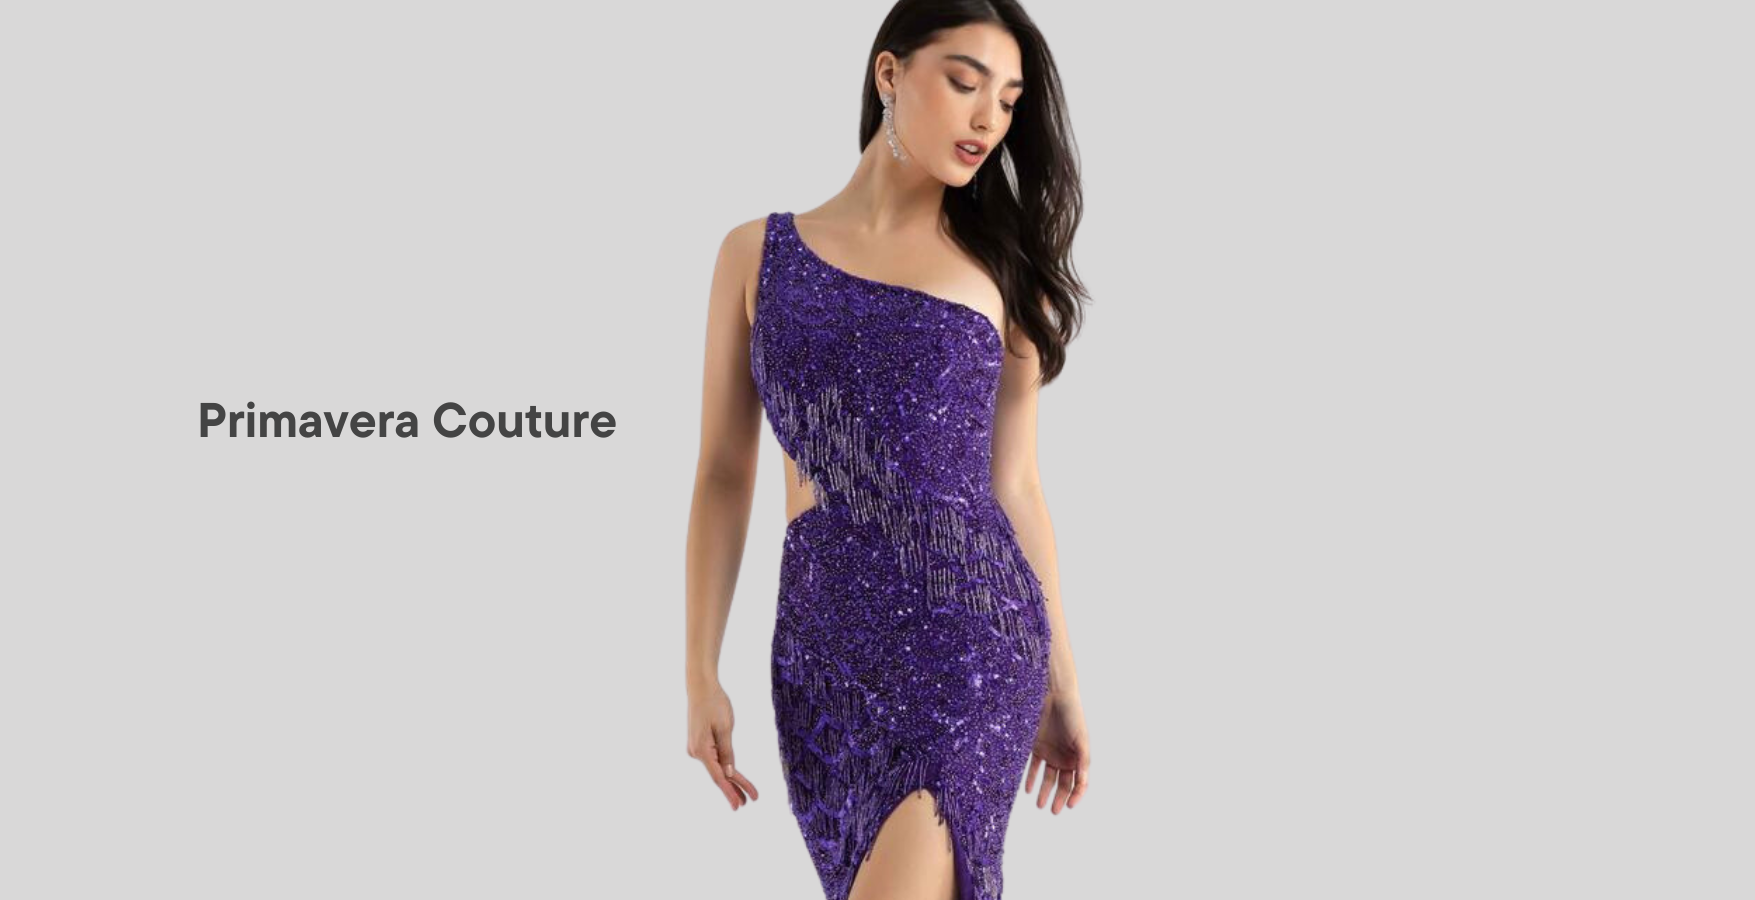 female wearing purple sparkly dress with text reading 'Primevera Couture' on the left